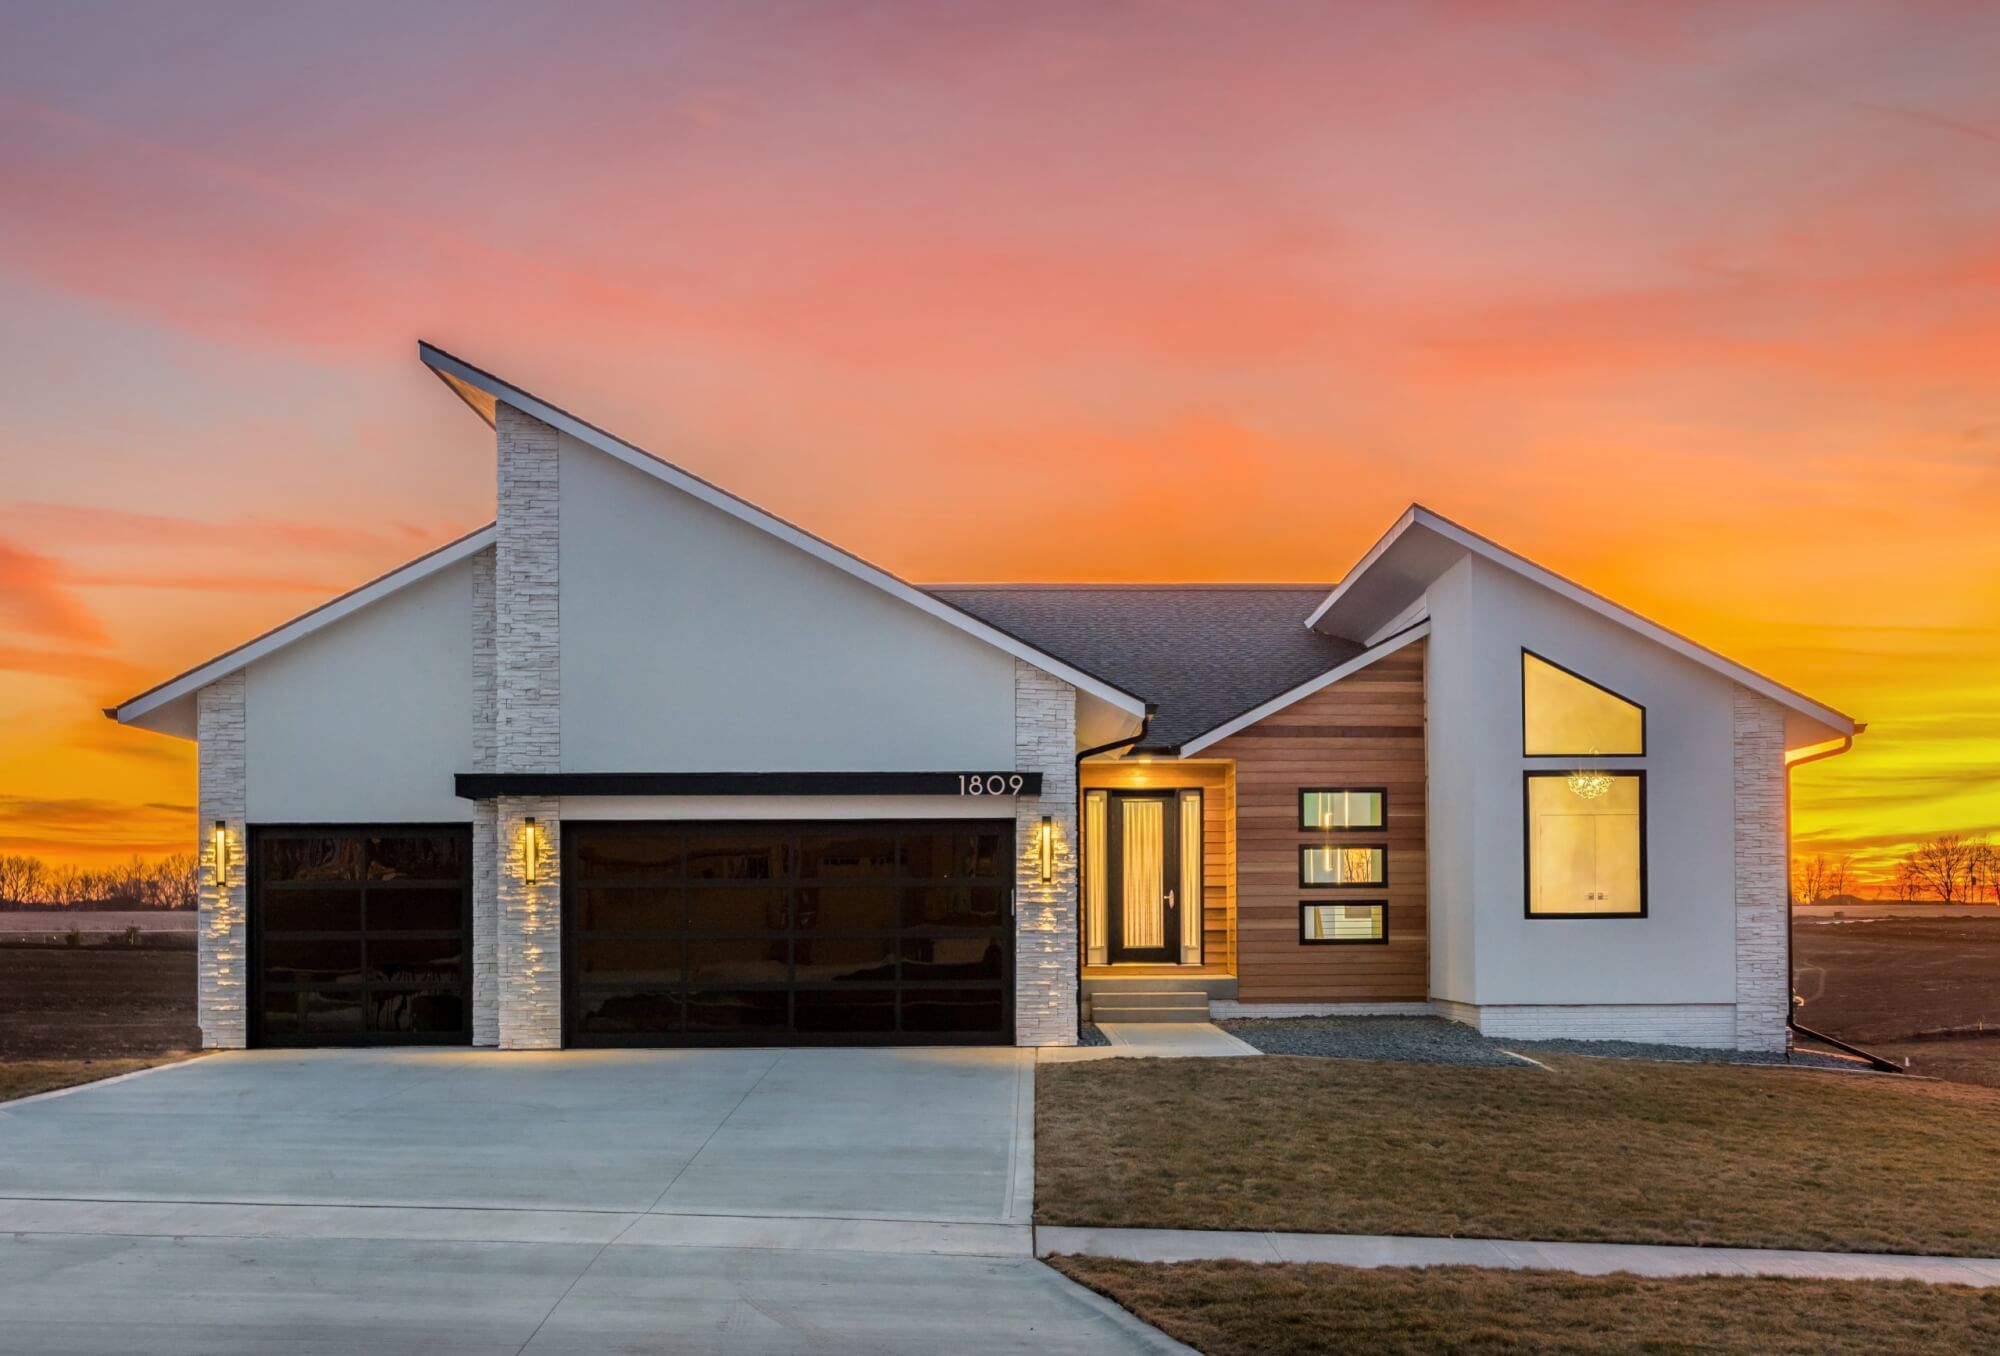 A modern wood and stone home built by Kruse Development with a sunset in the background.